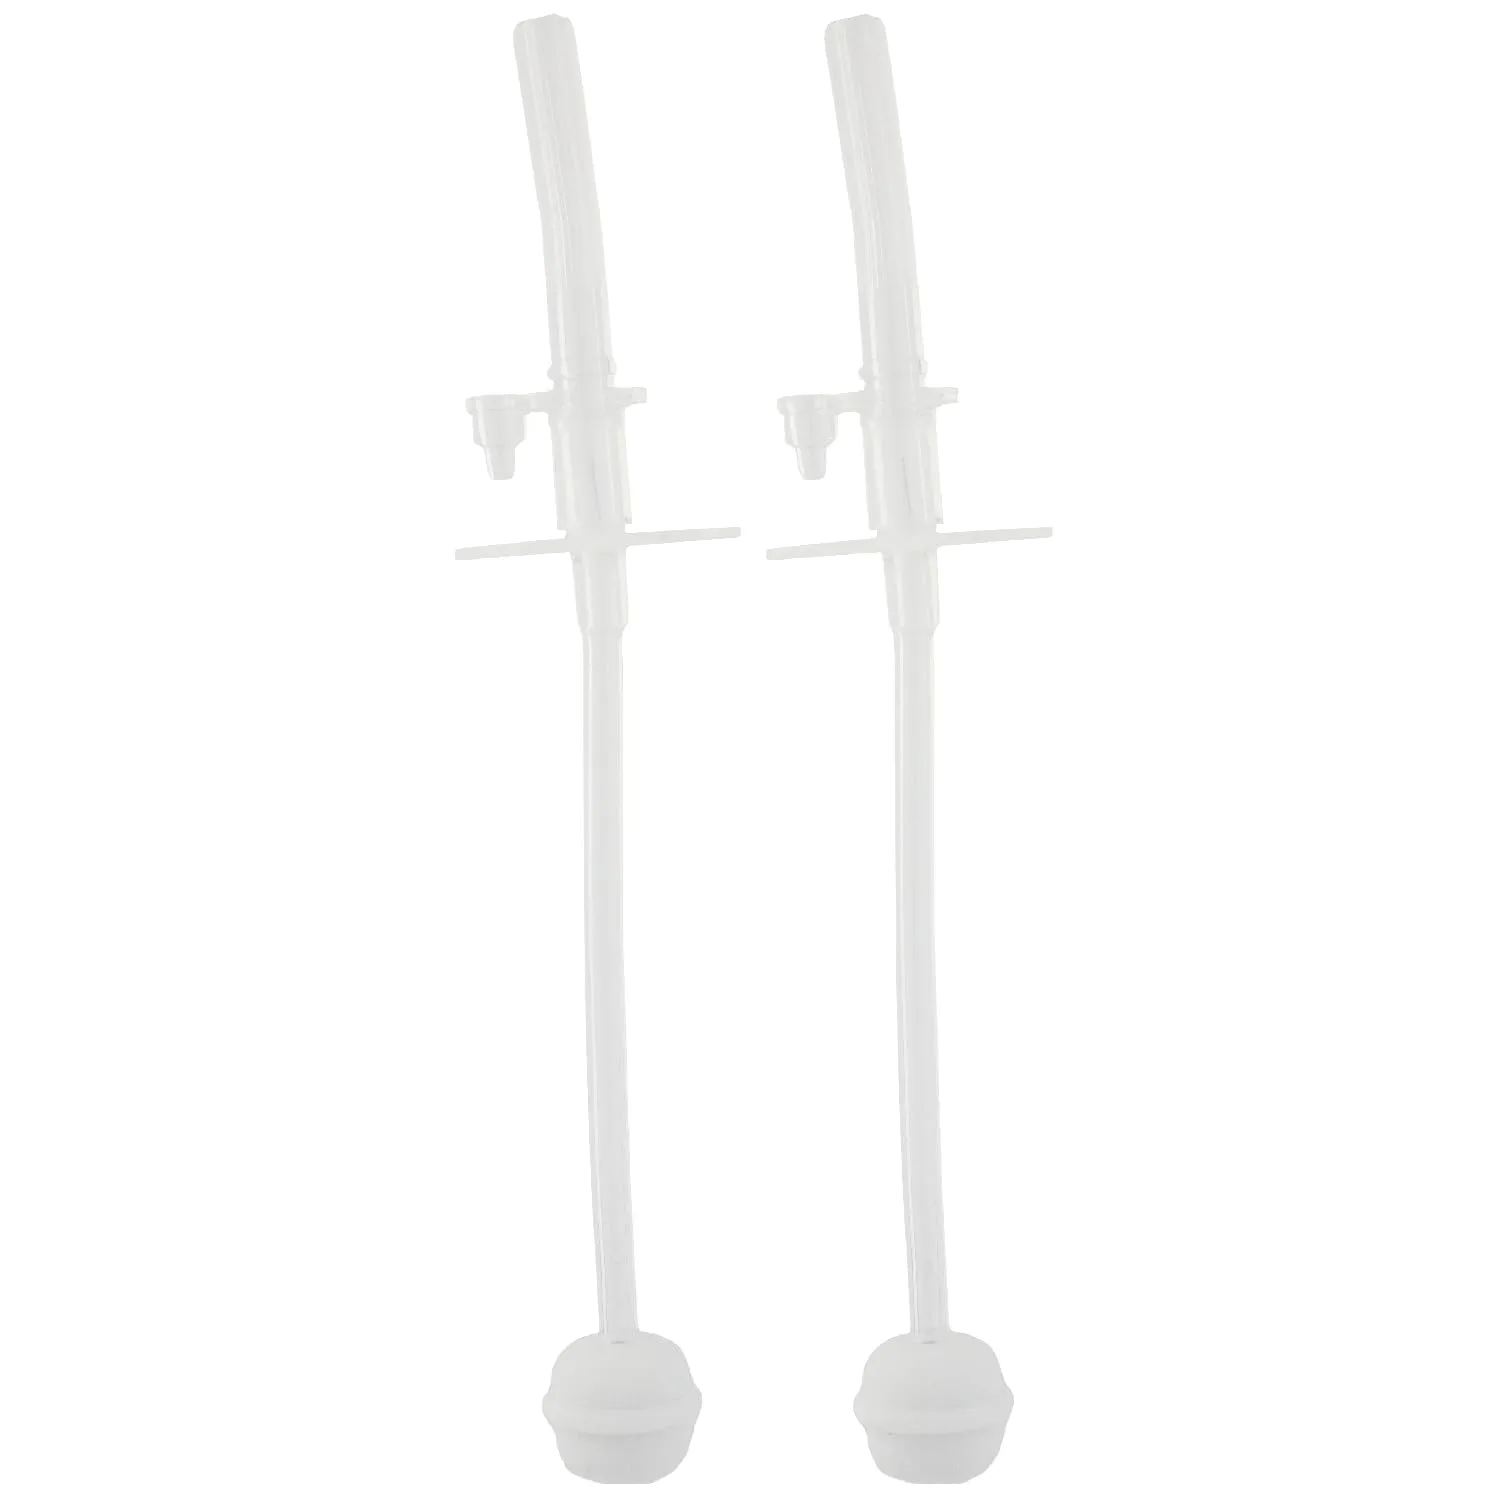 Dentistar replacement straws made of silicone in a set of 2 